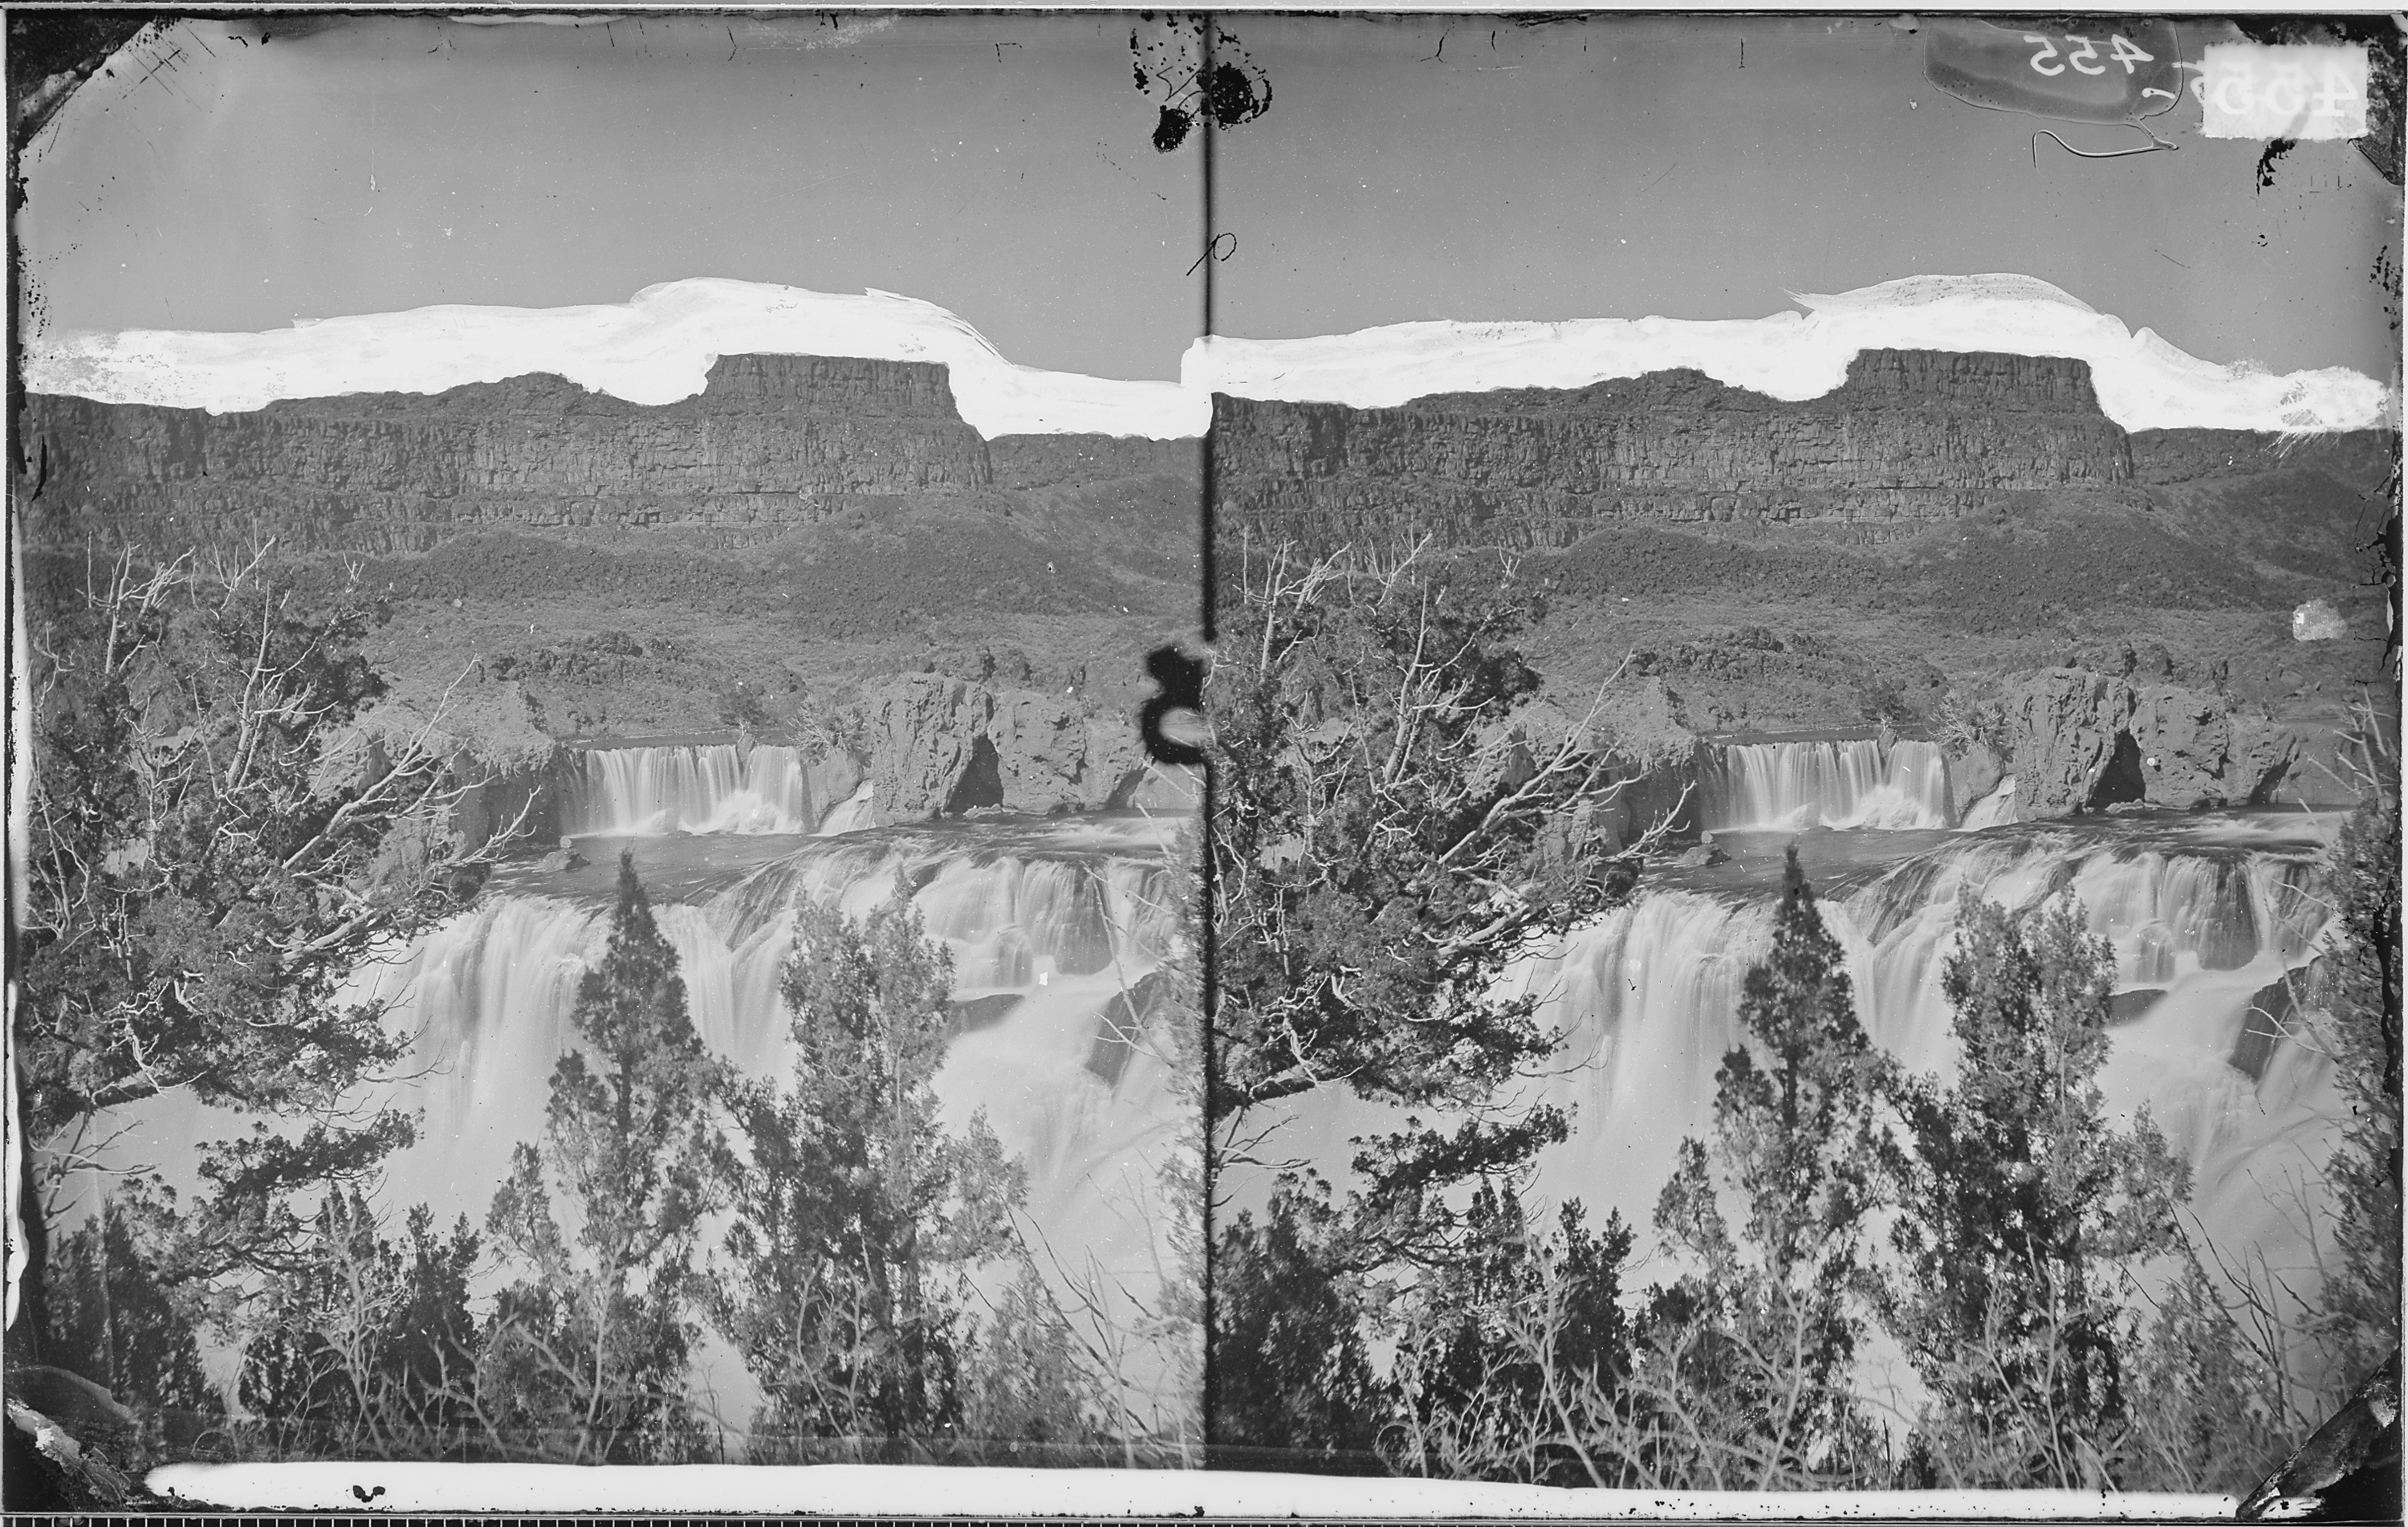 SHOSHONE FALLS, SNAKE RIVER, IDAHO, LOOKING THROUGH THE TIMBER & SHOWING THE MAIN FALL & UPPER OR 